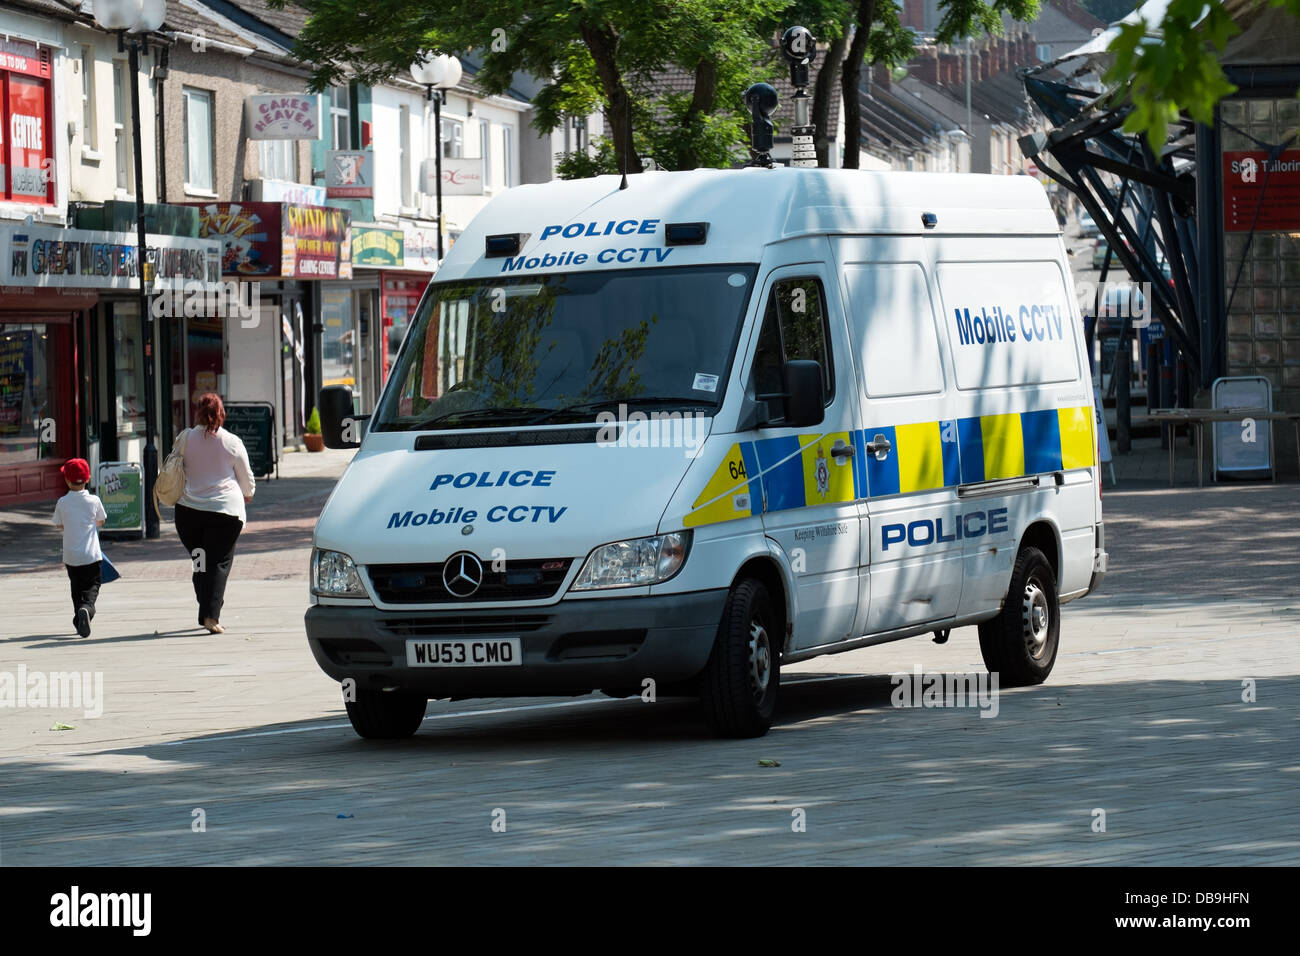 Surveillance Van High Resolution Stock Photography and Images - Alamy